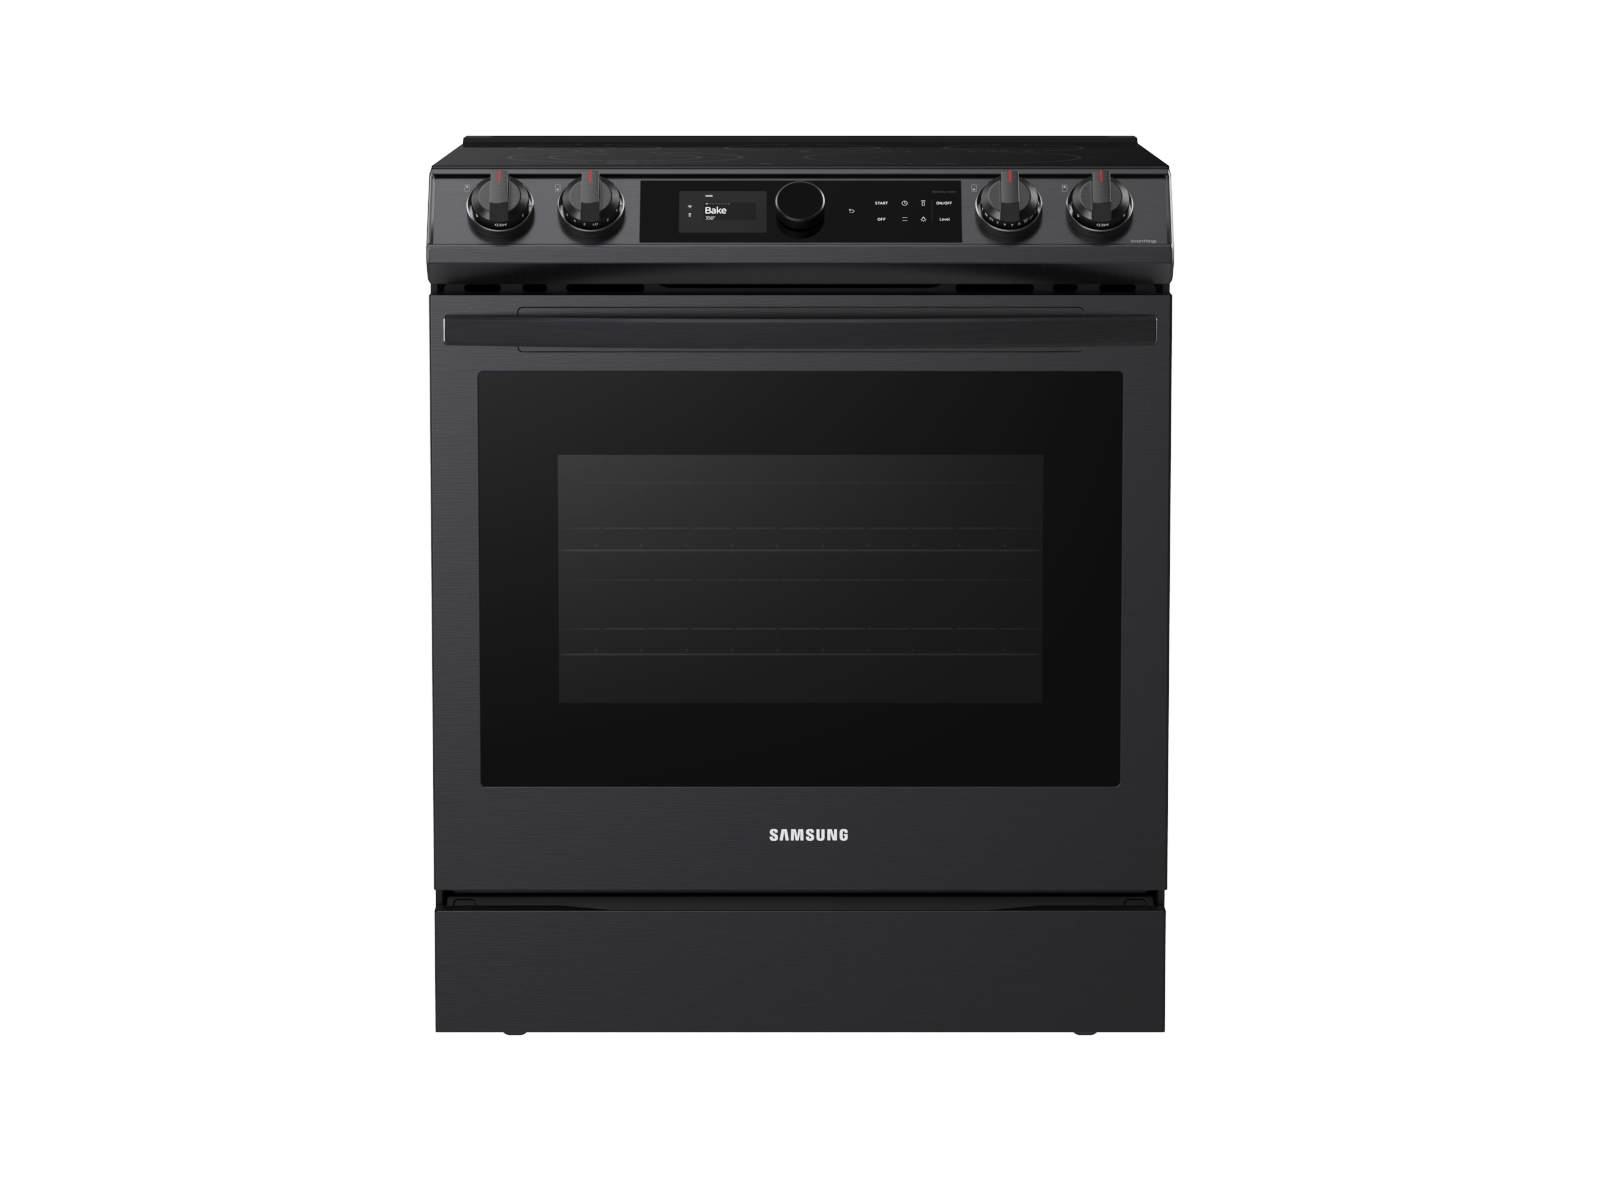 NEW $2200 Samsung INDUCTION Air Fry Convection Slide-In Electric